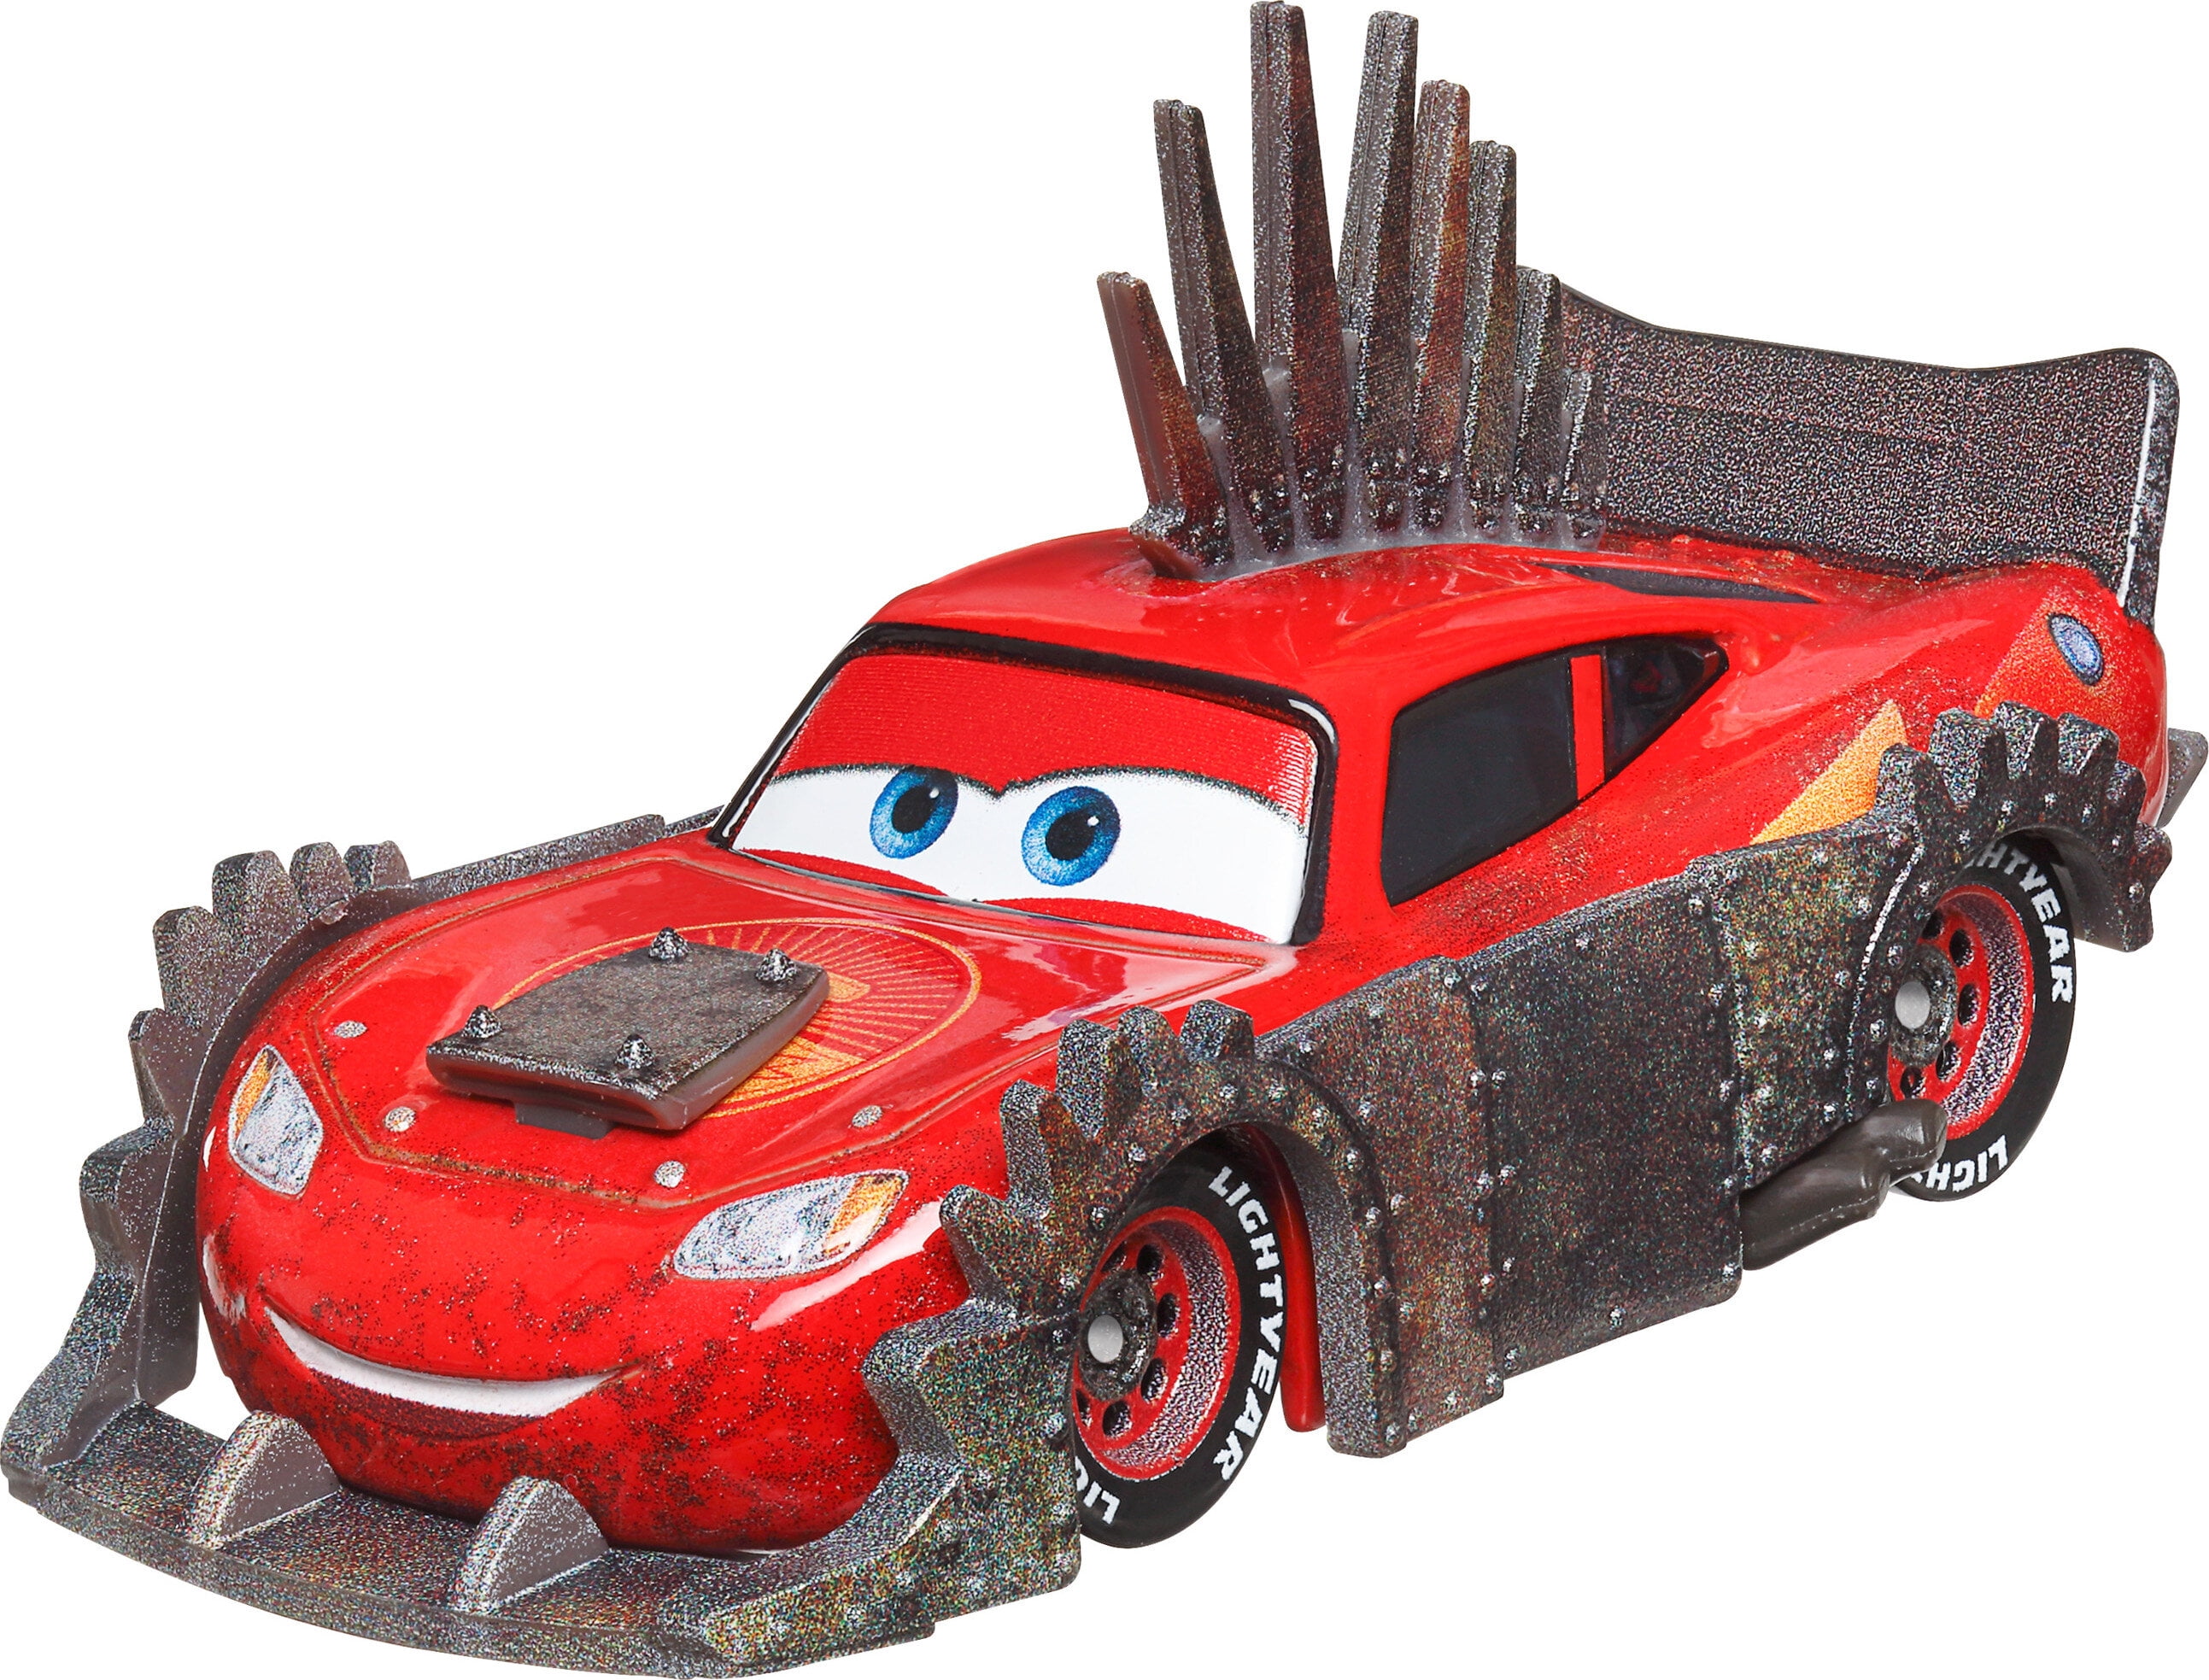 Disney and Pixar Cars Road Rumbler Lightning McQueen Die-Cast Toy Car, 1:55  Scale Collectible, lightning mcqueen 